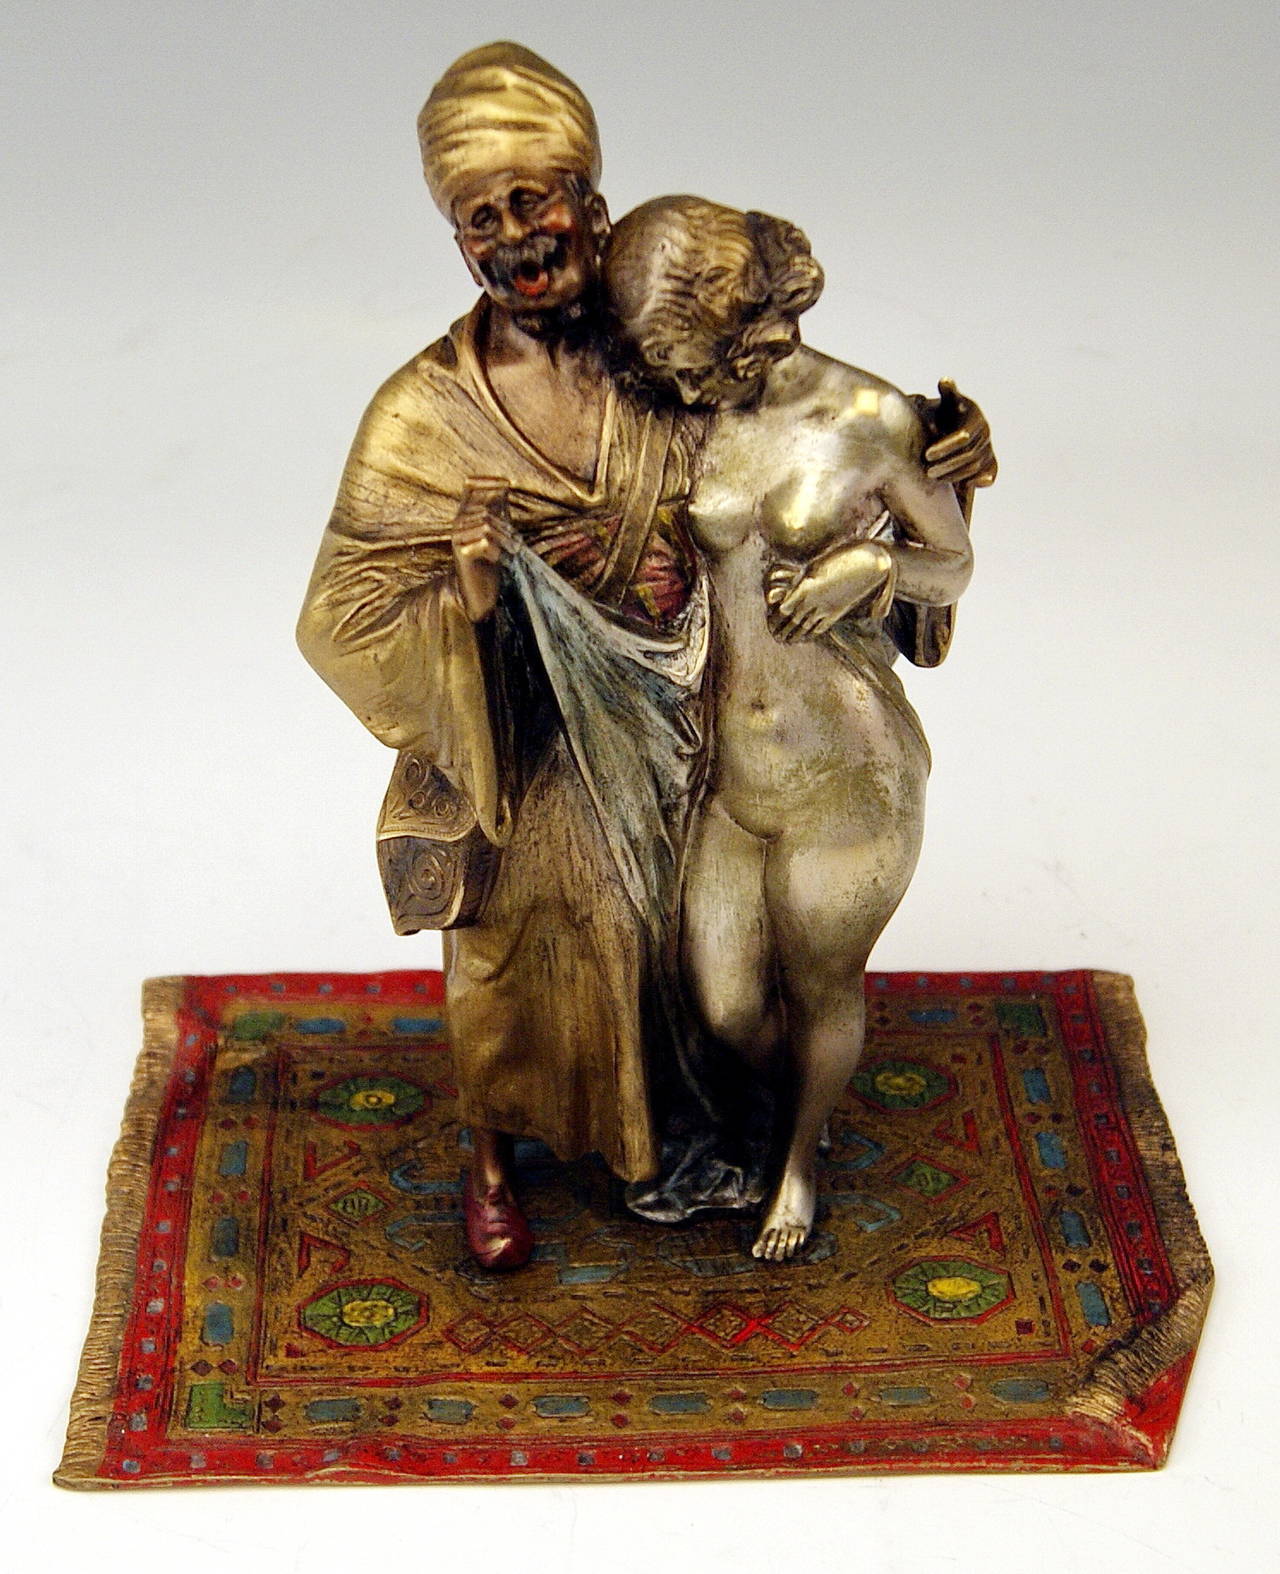 STUNNING BRONZE FIGURINE GROUP:
A SLAVE TRADER WITH GIRL (FEMALE NUDE).

ORIGIN OF MANUFACTORY:  VIENNA BRONZE

This REMARKABLE AS WELL AS STUNNING BRONZE FIGURINE GROUP is a FINEST EXAMPLE of VIENNESE BRONZE MANUFACTURING ! 

DATING:   